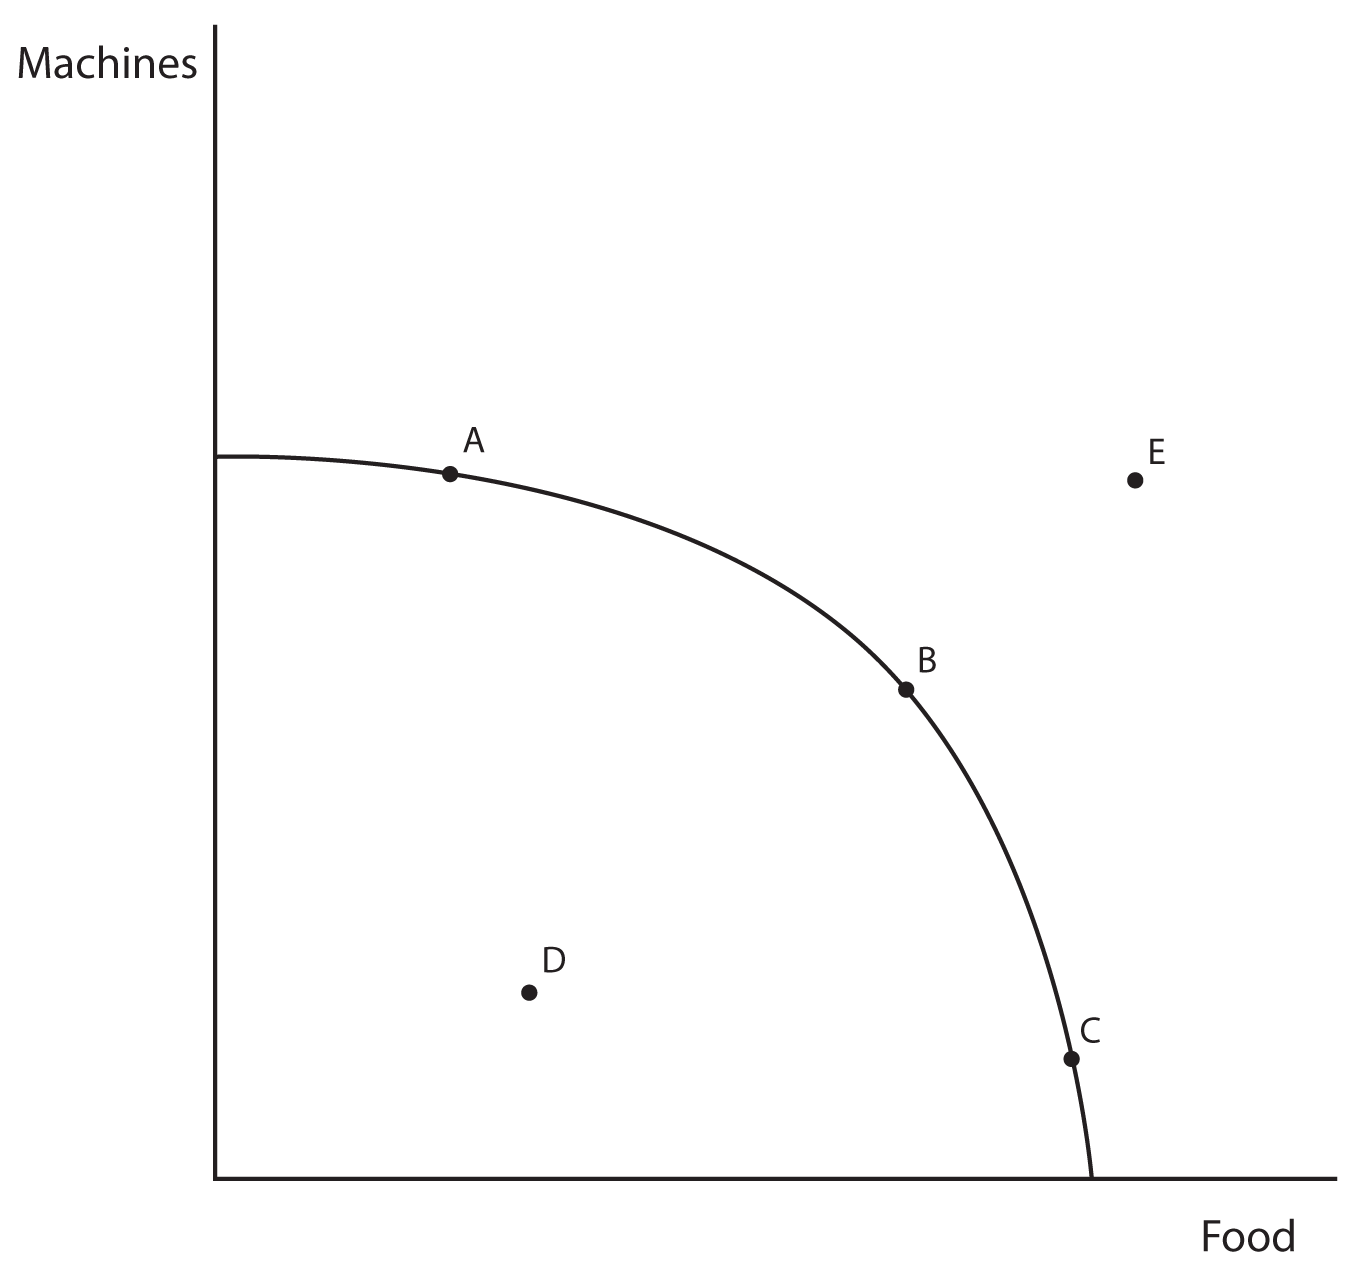 Description: Description: Image 1.02 Production Possibilities Curve. This image shows a graph with Food on the X axis and Machines on the Y axis.  The graph contains a downward sloping curved line which is rounded as if it were part of a circle centered at the origin.  Three points lie on this line: from left to right, they are A, B, and C.  Point D lies inside of the curve close to the origin.  Point E lies outside of the curve, with approximately the same Y value as point A but a much larger X value than point C.